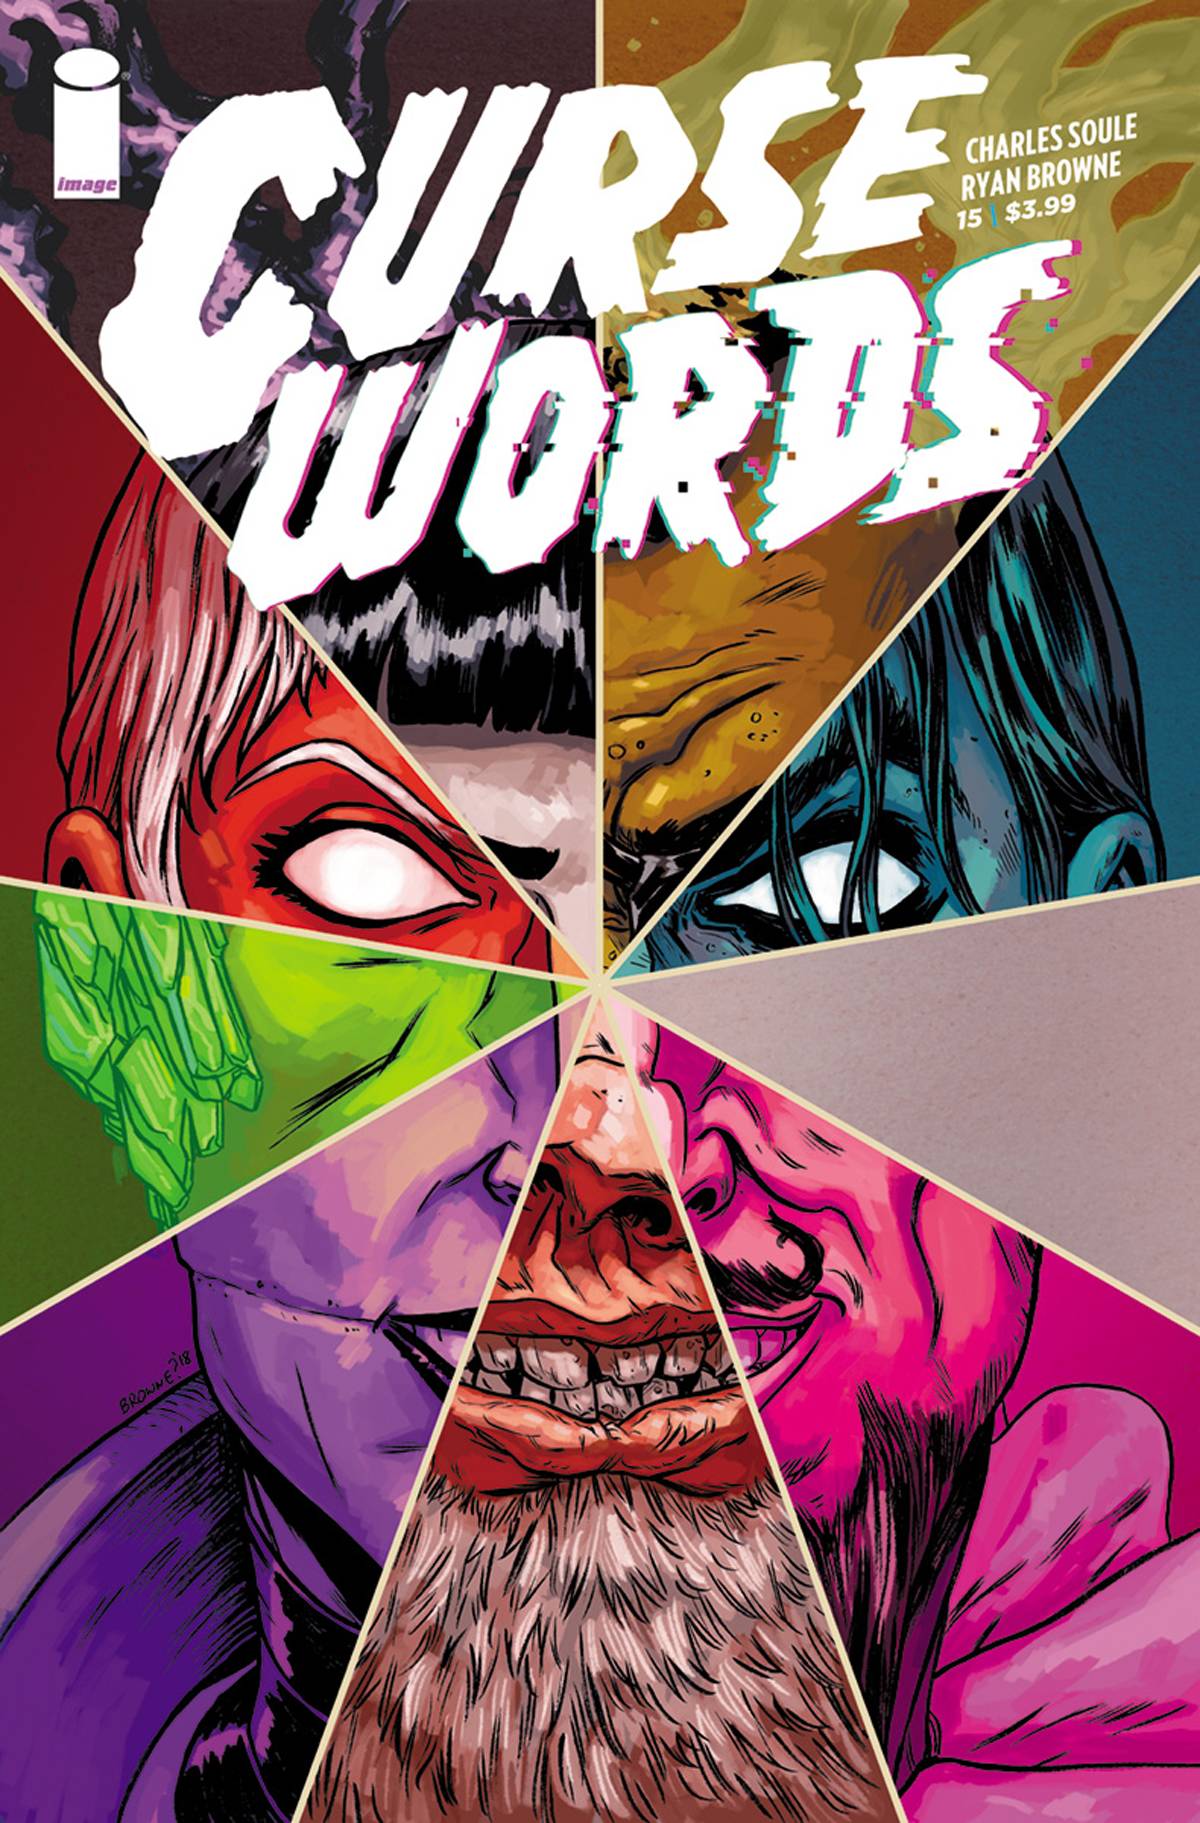 Curse Words #15 Cover A Browne (Mature)